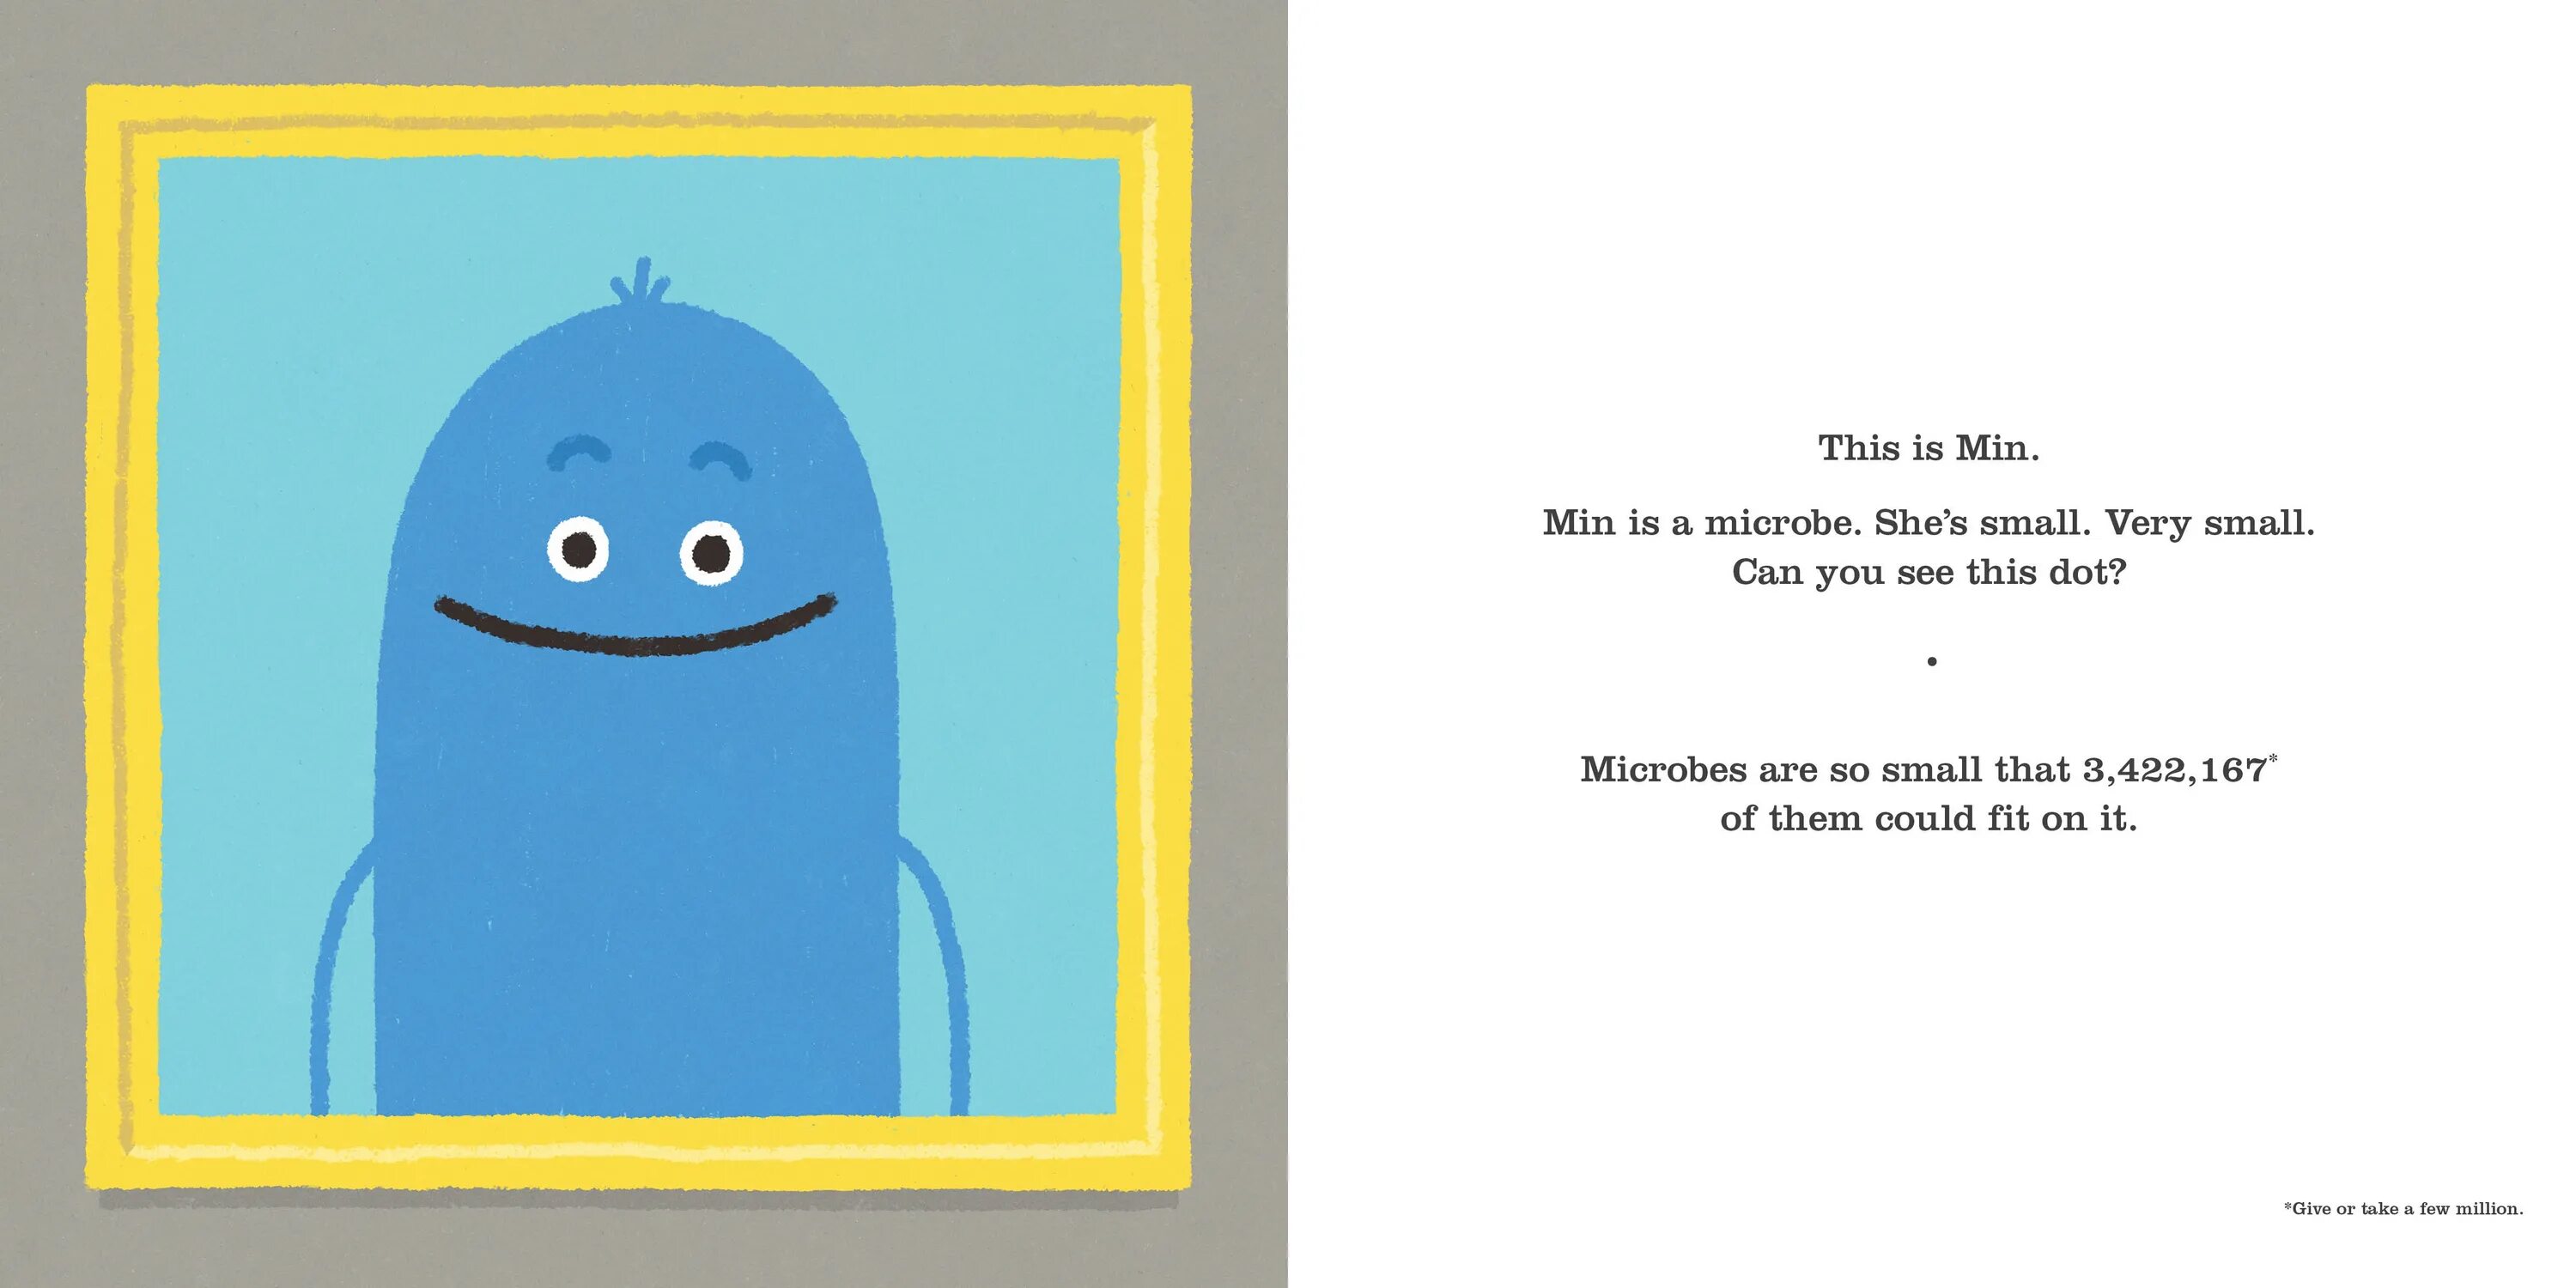 Do not open this book. This book is not good for you. Dumb ways to die рисунок.